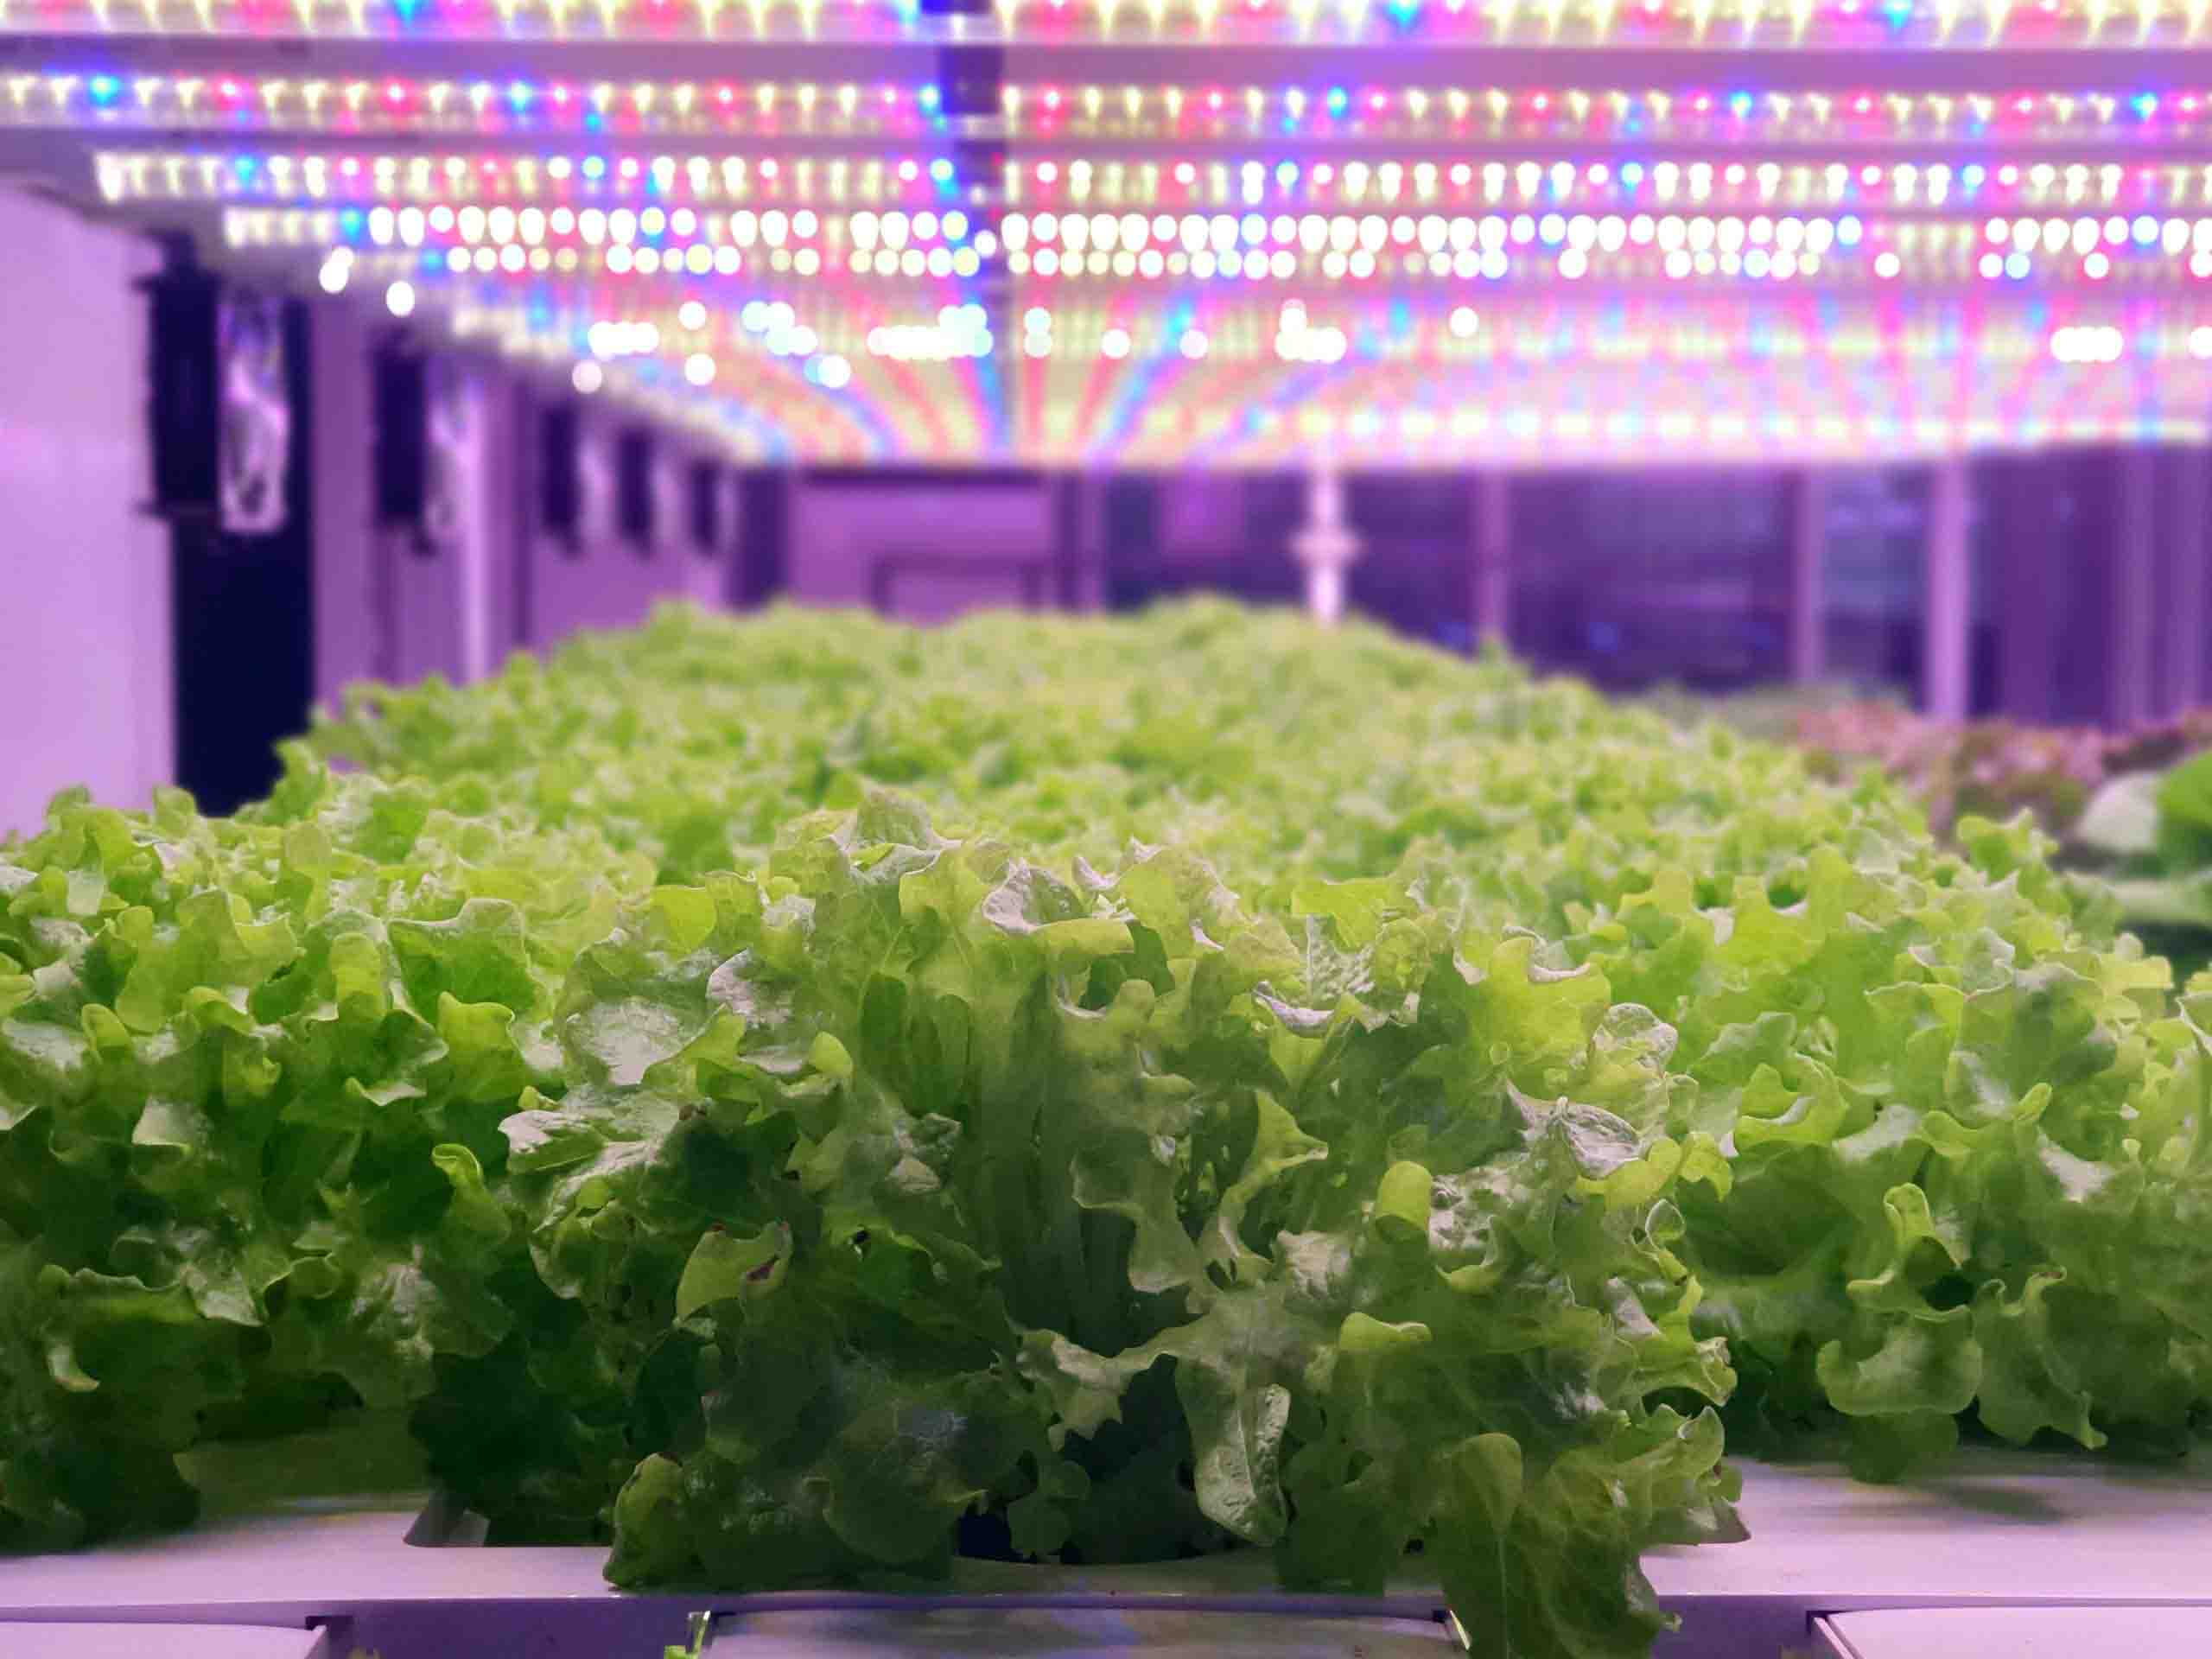 Hydroponic growing system